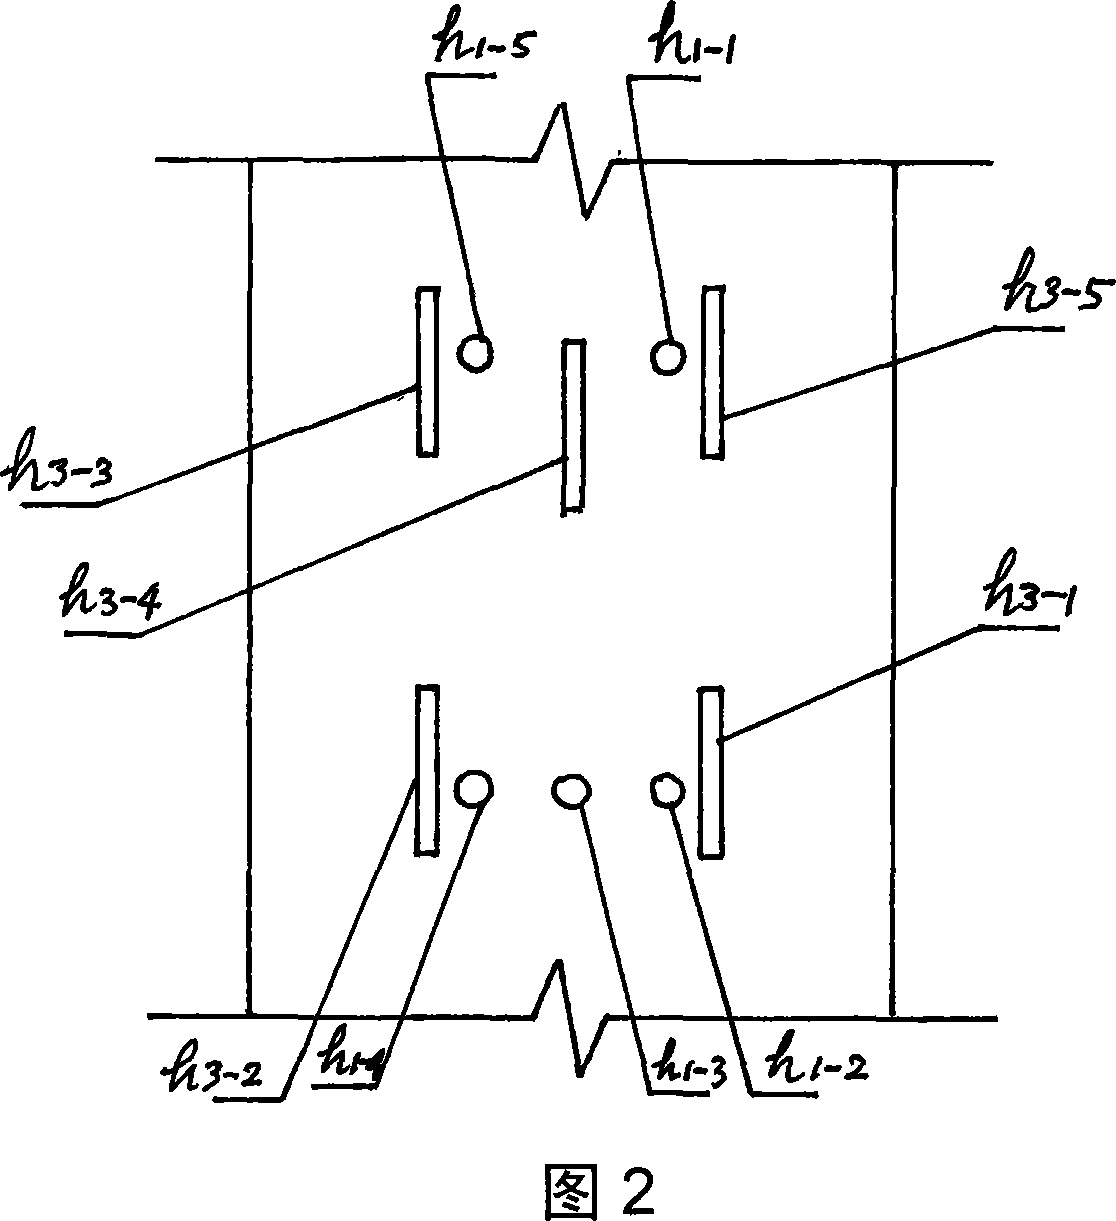 Connecting structure for steel tube concrete beam and column node